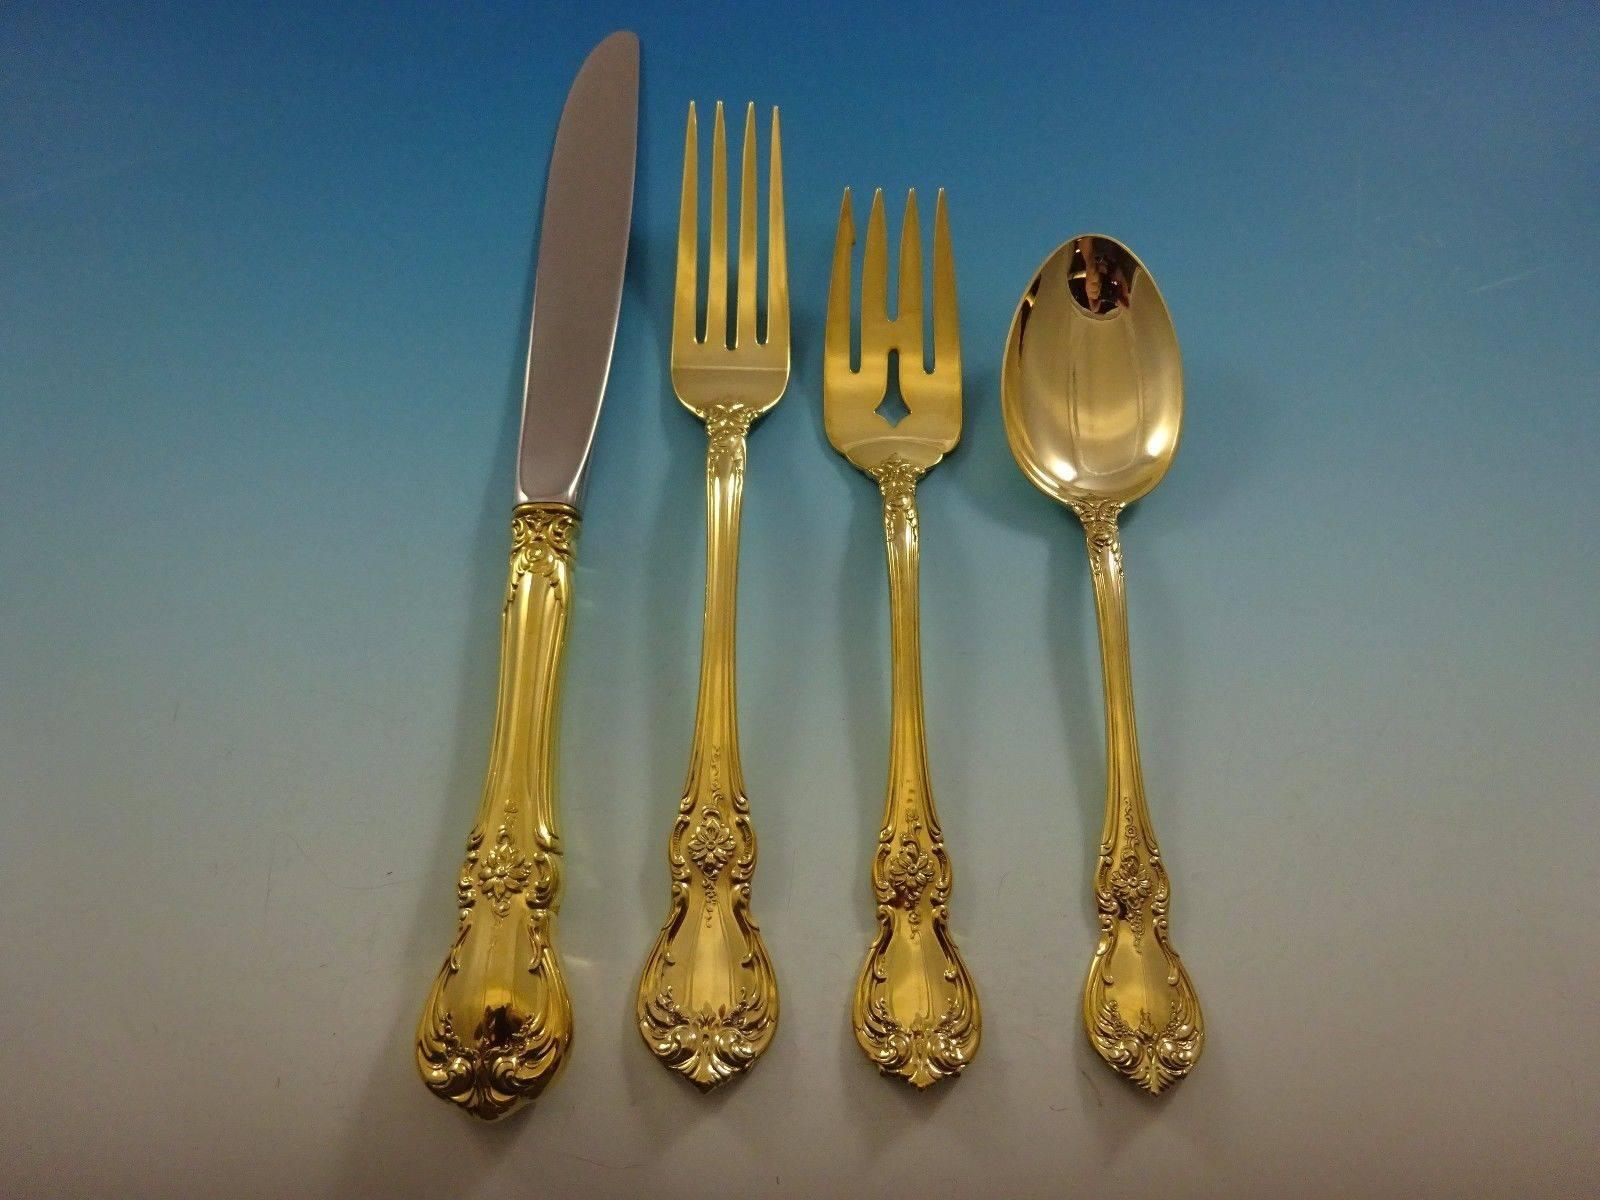 Old Master Gold by Towle Sterling Silver flatware set - 48 pieces. This set is vermeil (completely gold-washed) and includes: 

12 Knives, 8 7/8